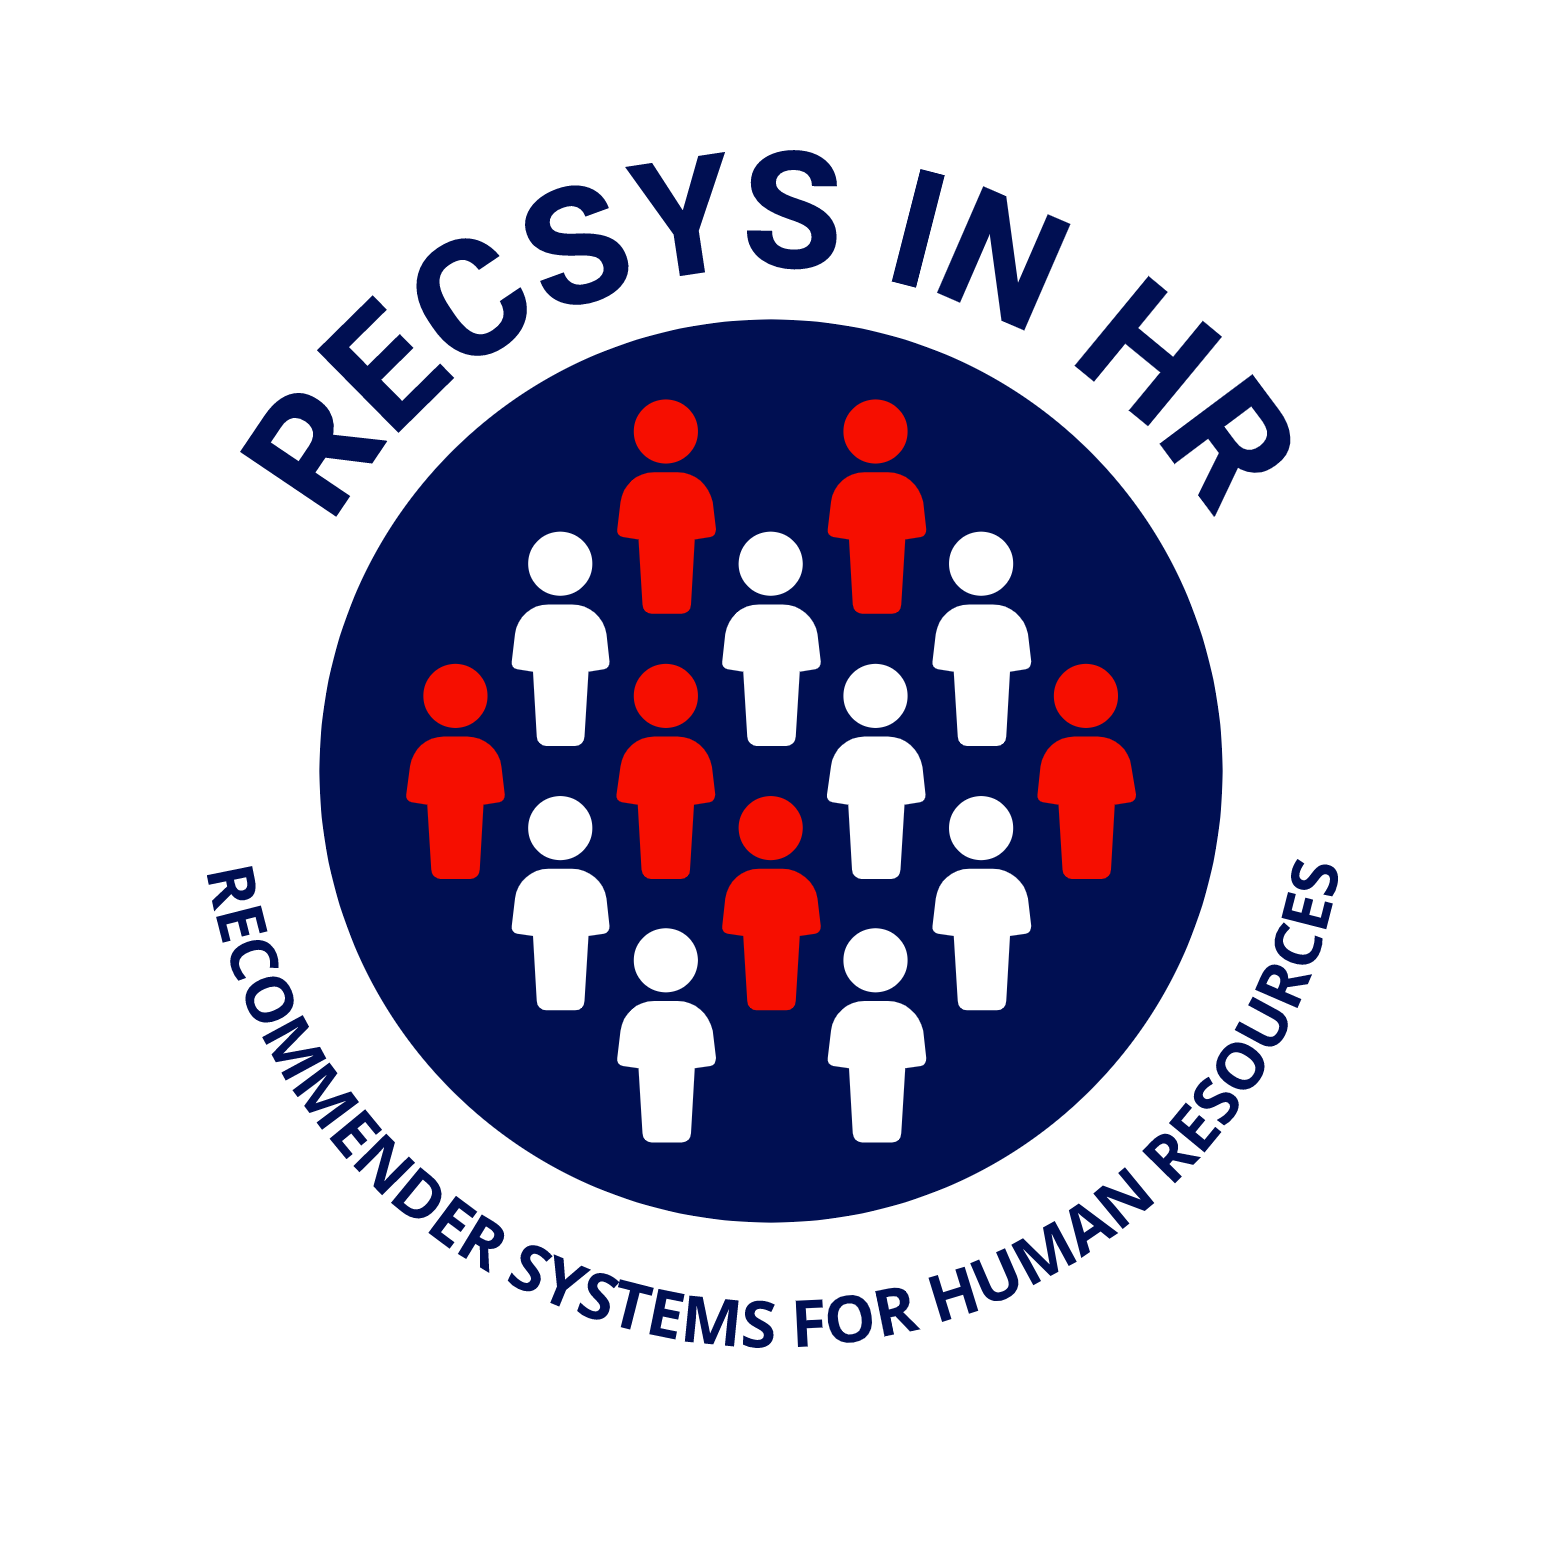 RecSys in HR 2021